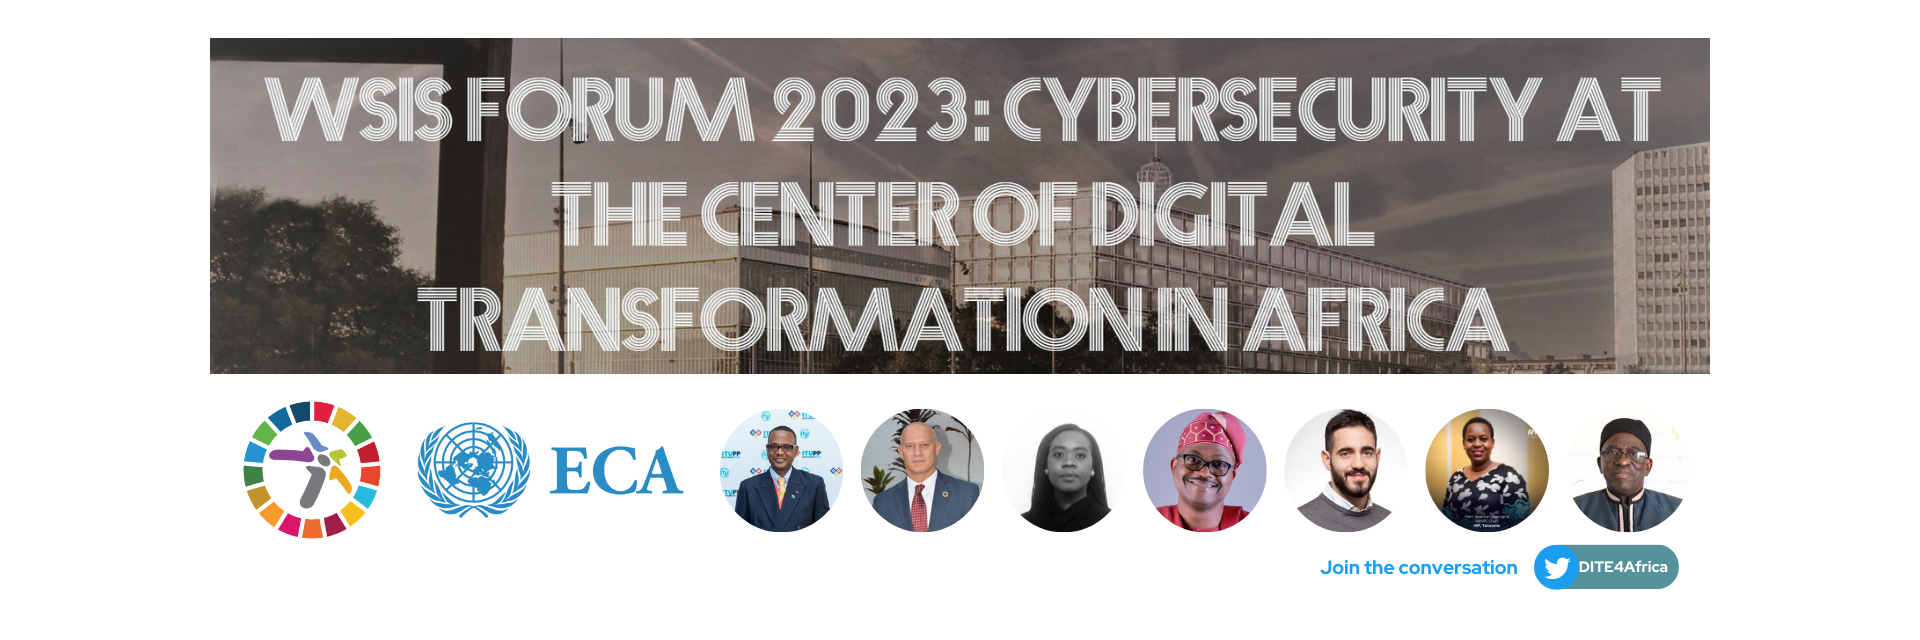 Cybersecurity at the center of Digital Transformation in Africa: ECA’s session at the ongoing World Summit on the Information Society (WSIS) in Geneva.